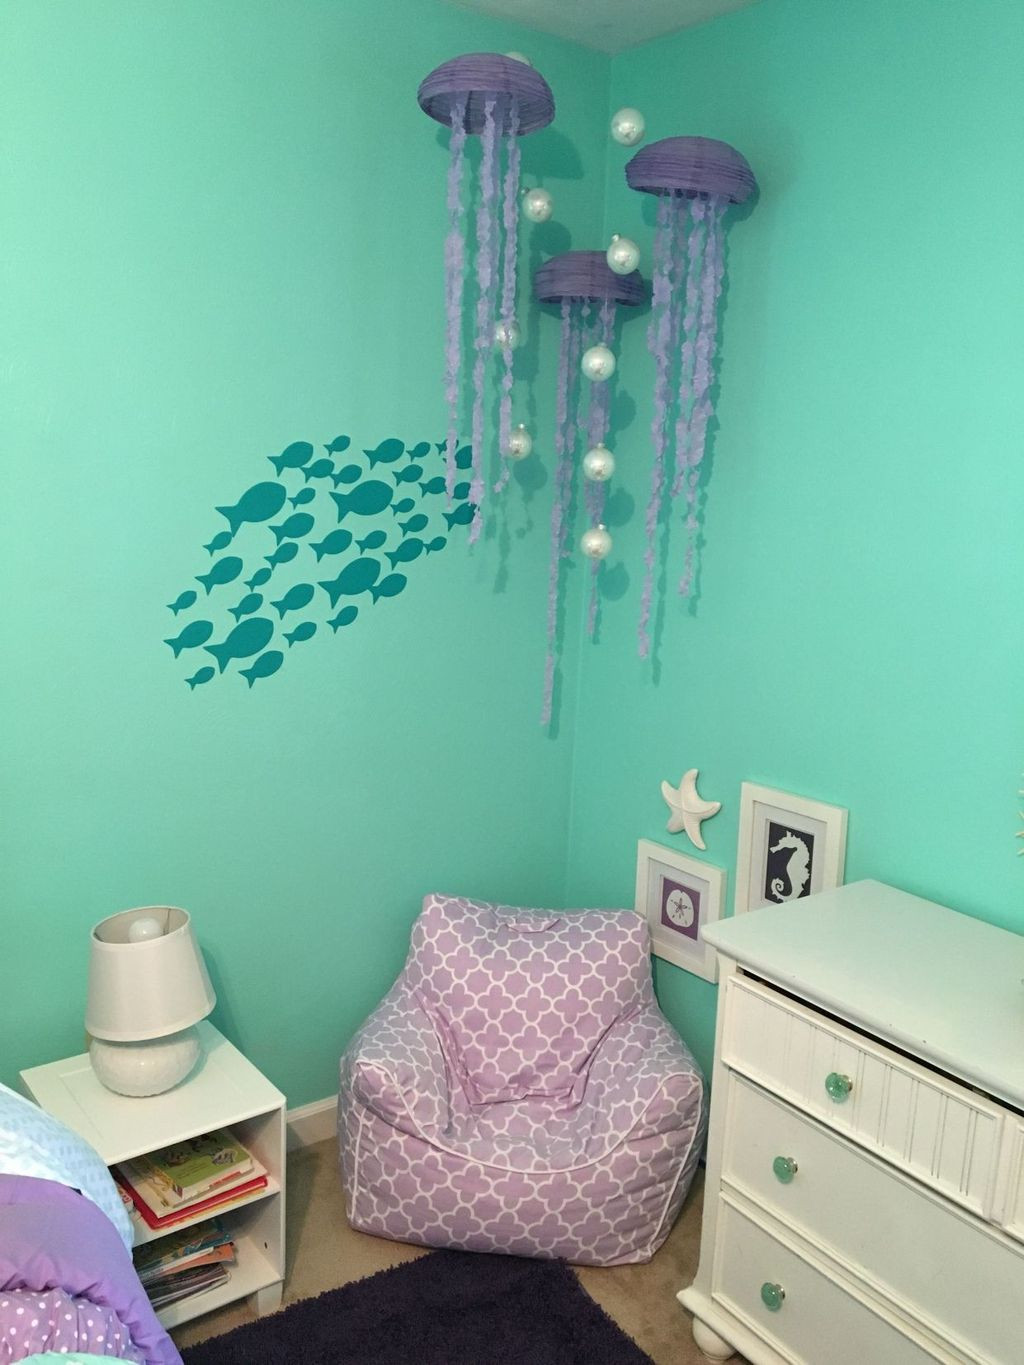 Mermaid Decor For Kids Room
 40 Cute And Beautiful Mermaid Themes Bedroom Ideas For